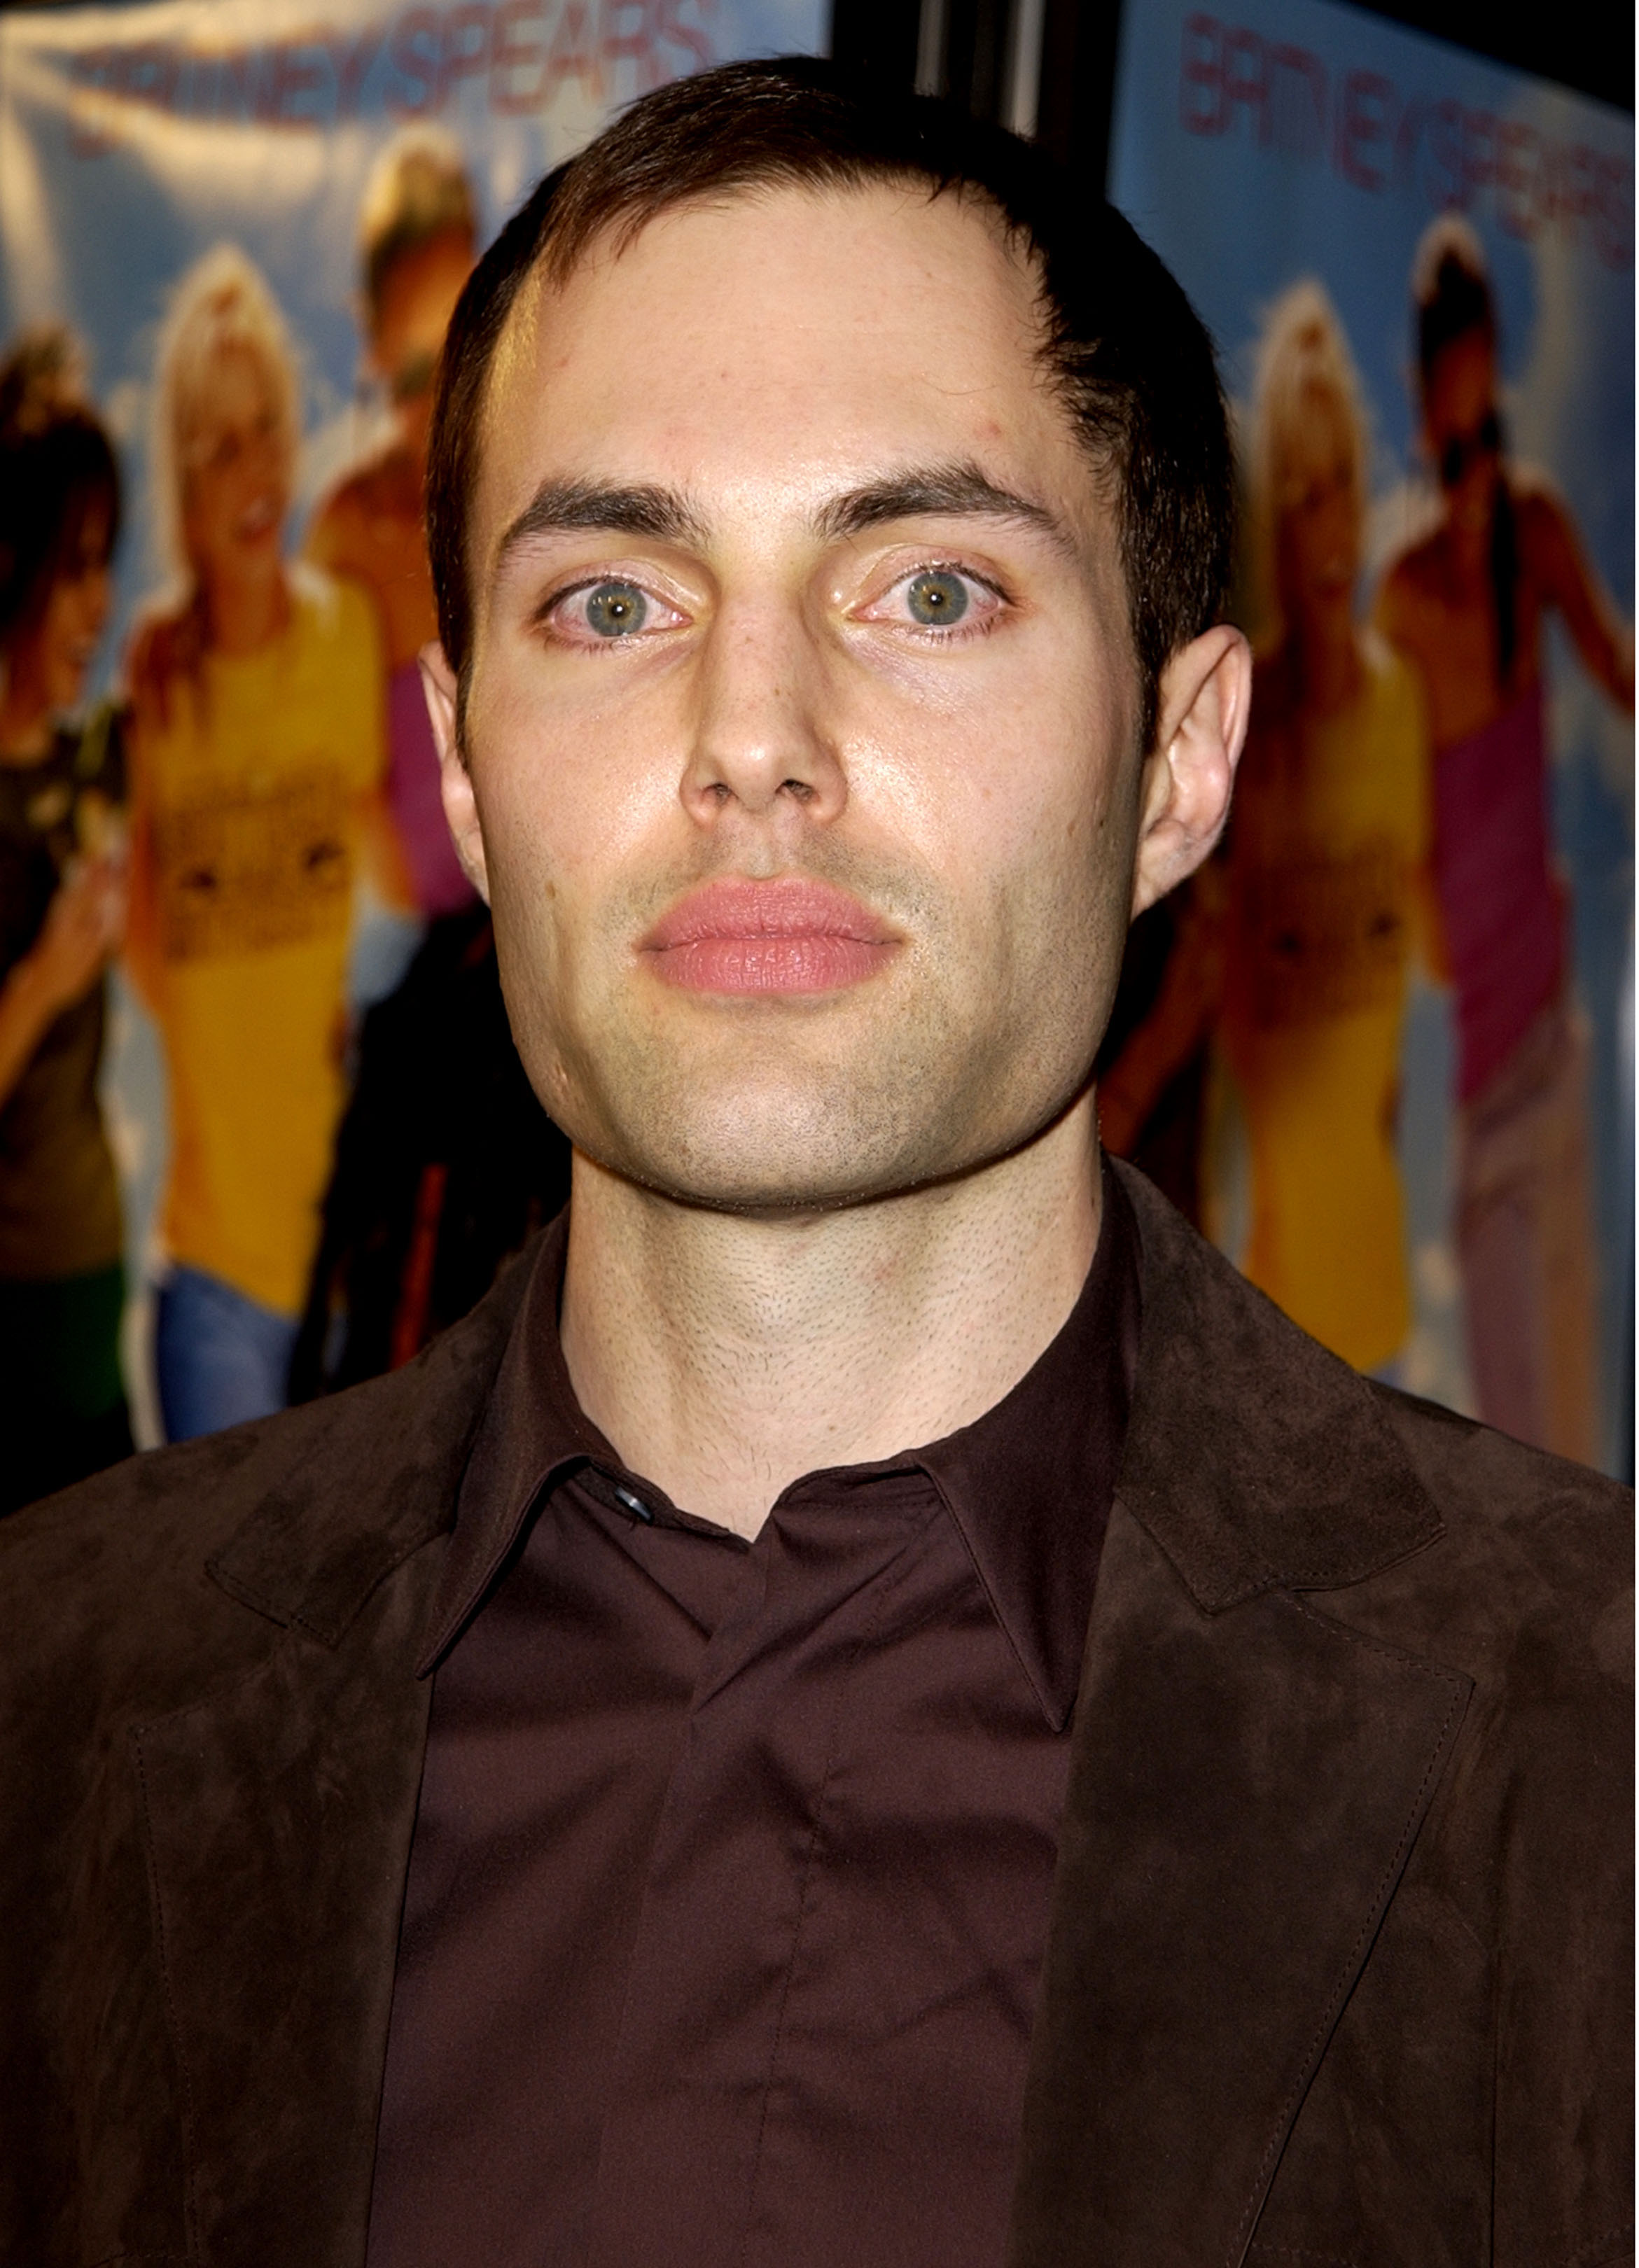 James Haven at the Grauman's Chinese Theatre in Hollywood, California on February 11, 2002 | Source: Getty Images